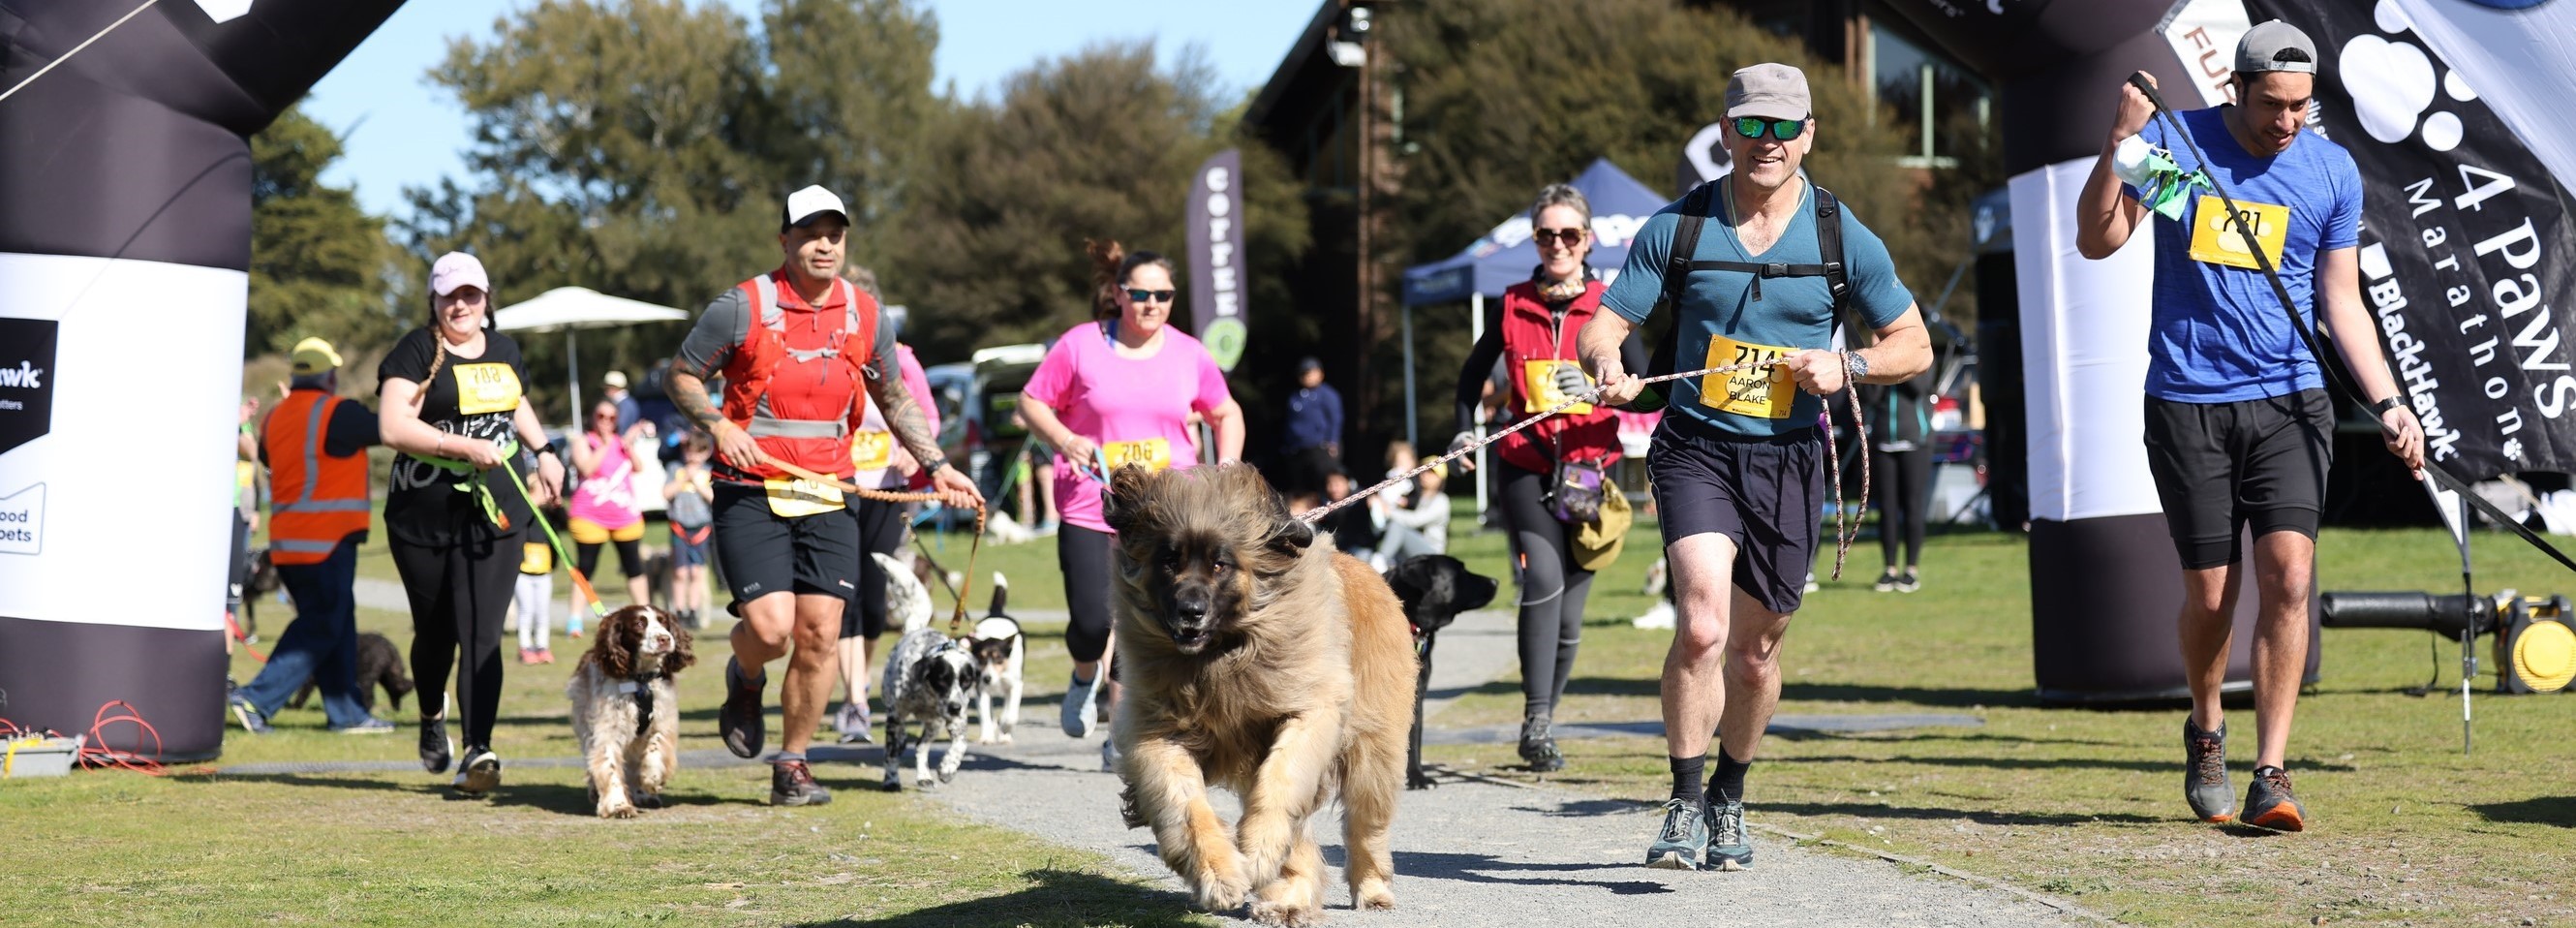 Marathon runners and their dogs crossing finish line